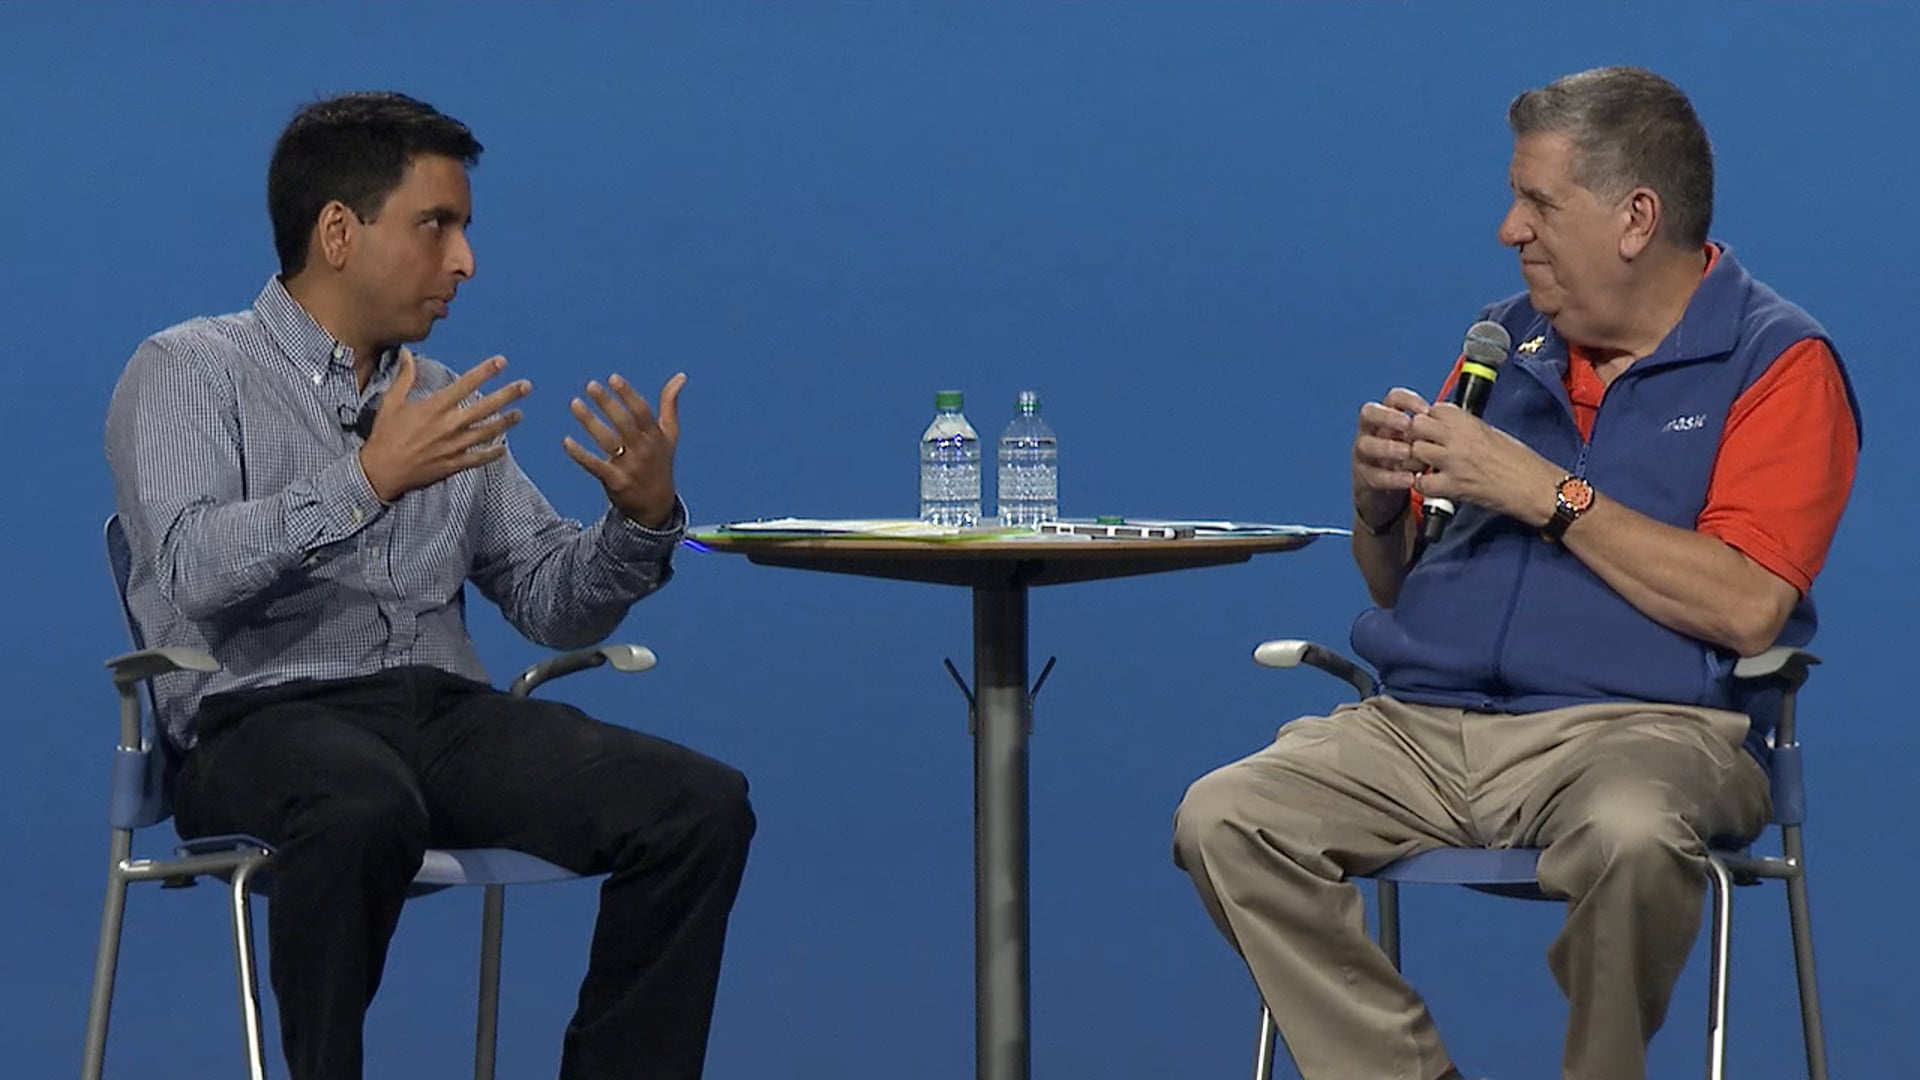 Sal Khan, Founder of Khan Academy - Use of Video for Learning